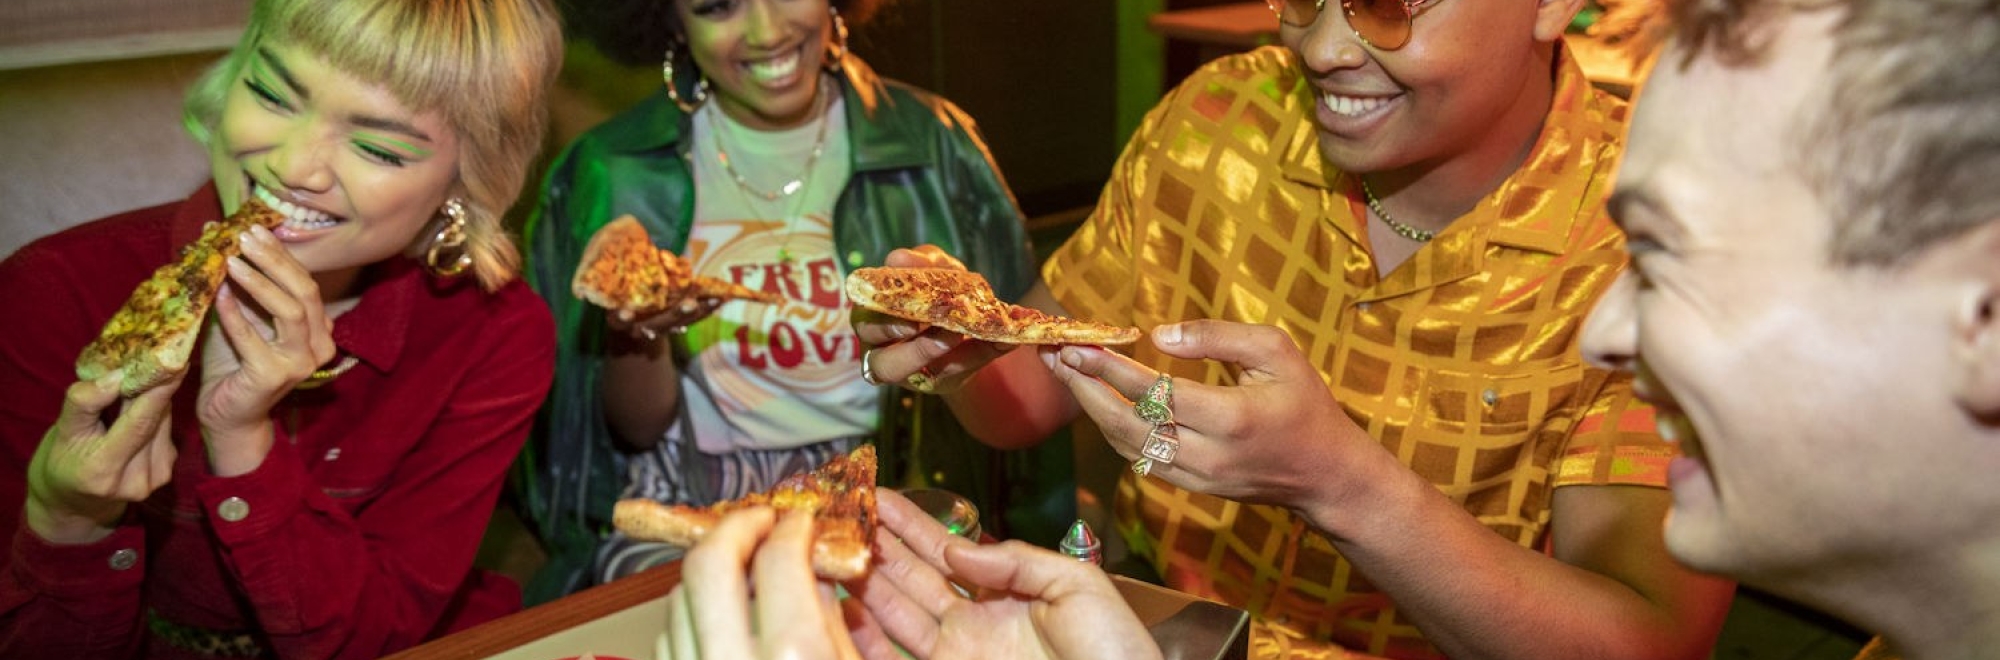 Papa John’s new global campaign turns a pizza shop into a pizza party